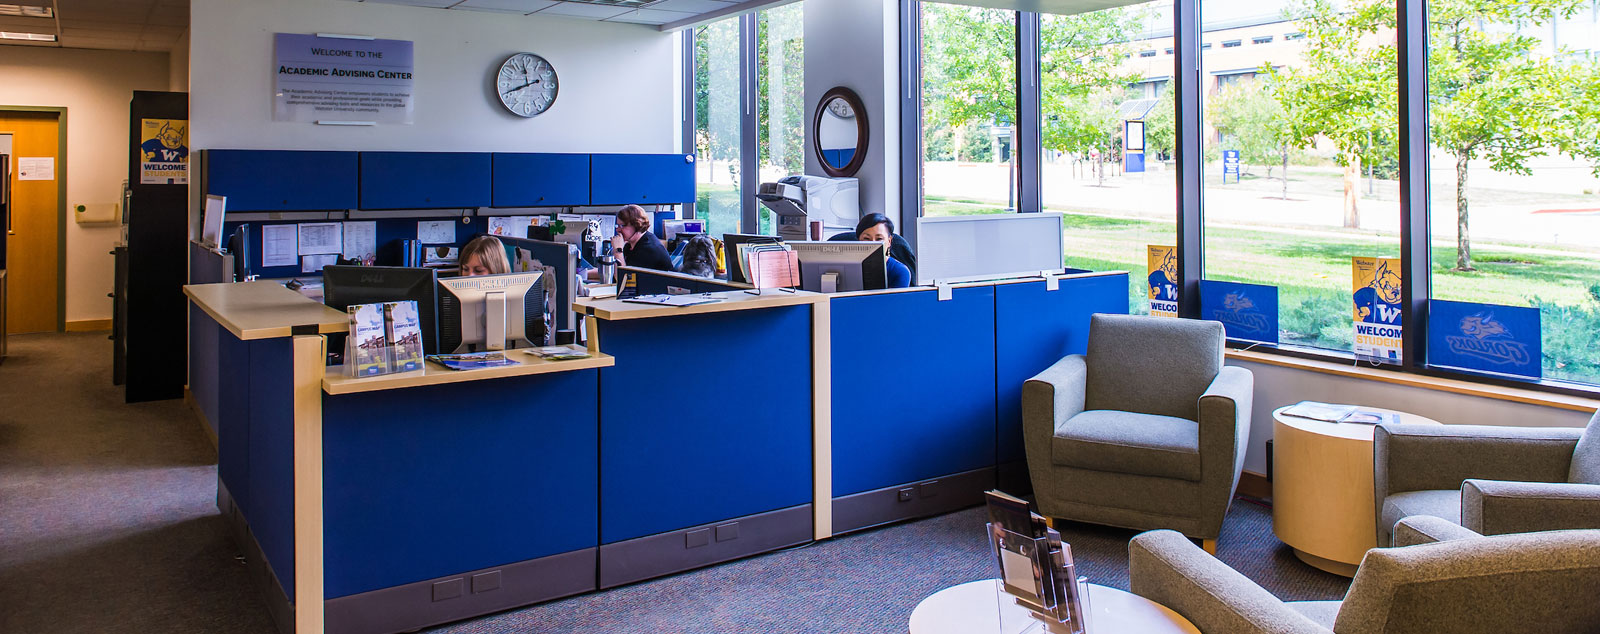 View of the Academic Advising center's reception area with blue front desk and several soft chairs in front of it.